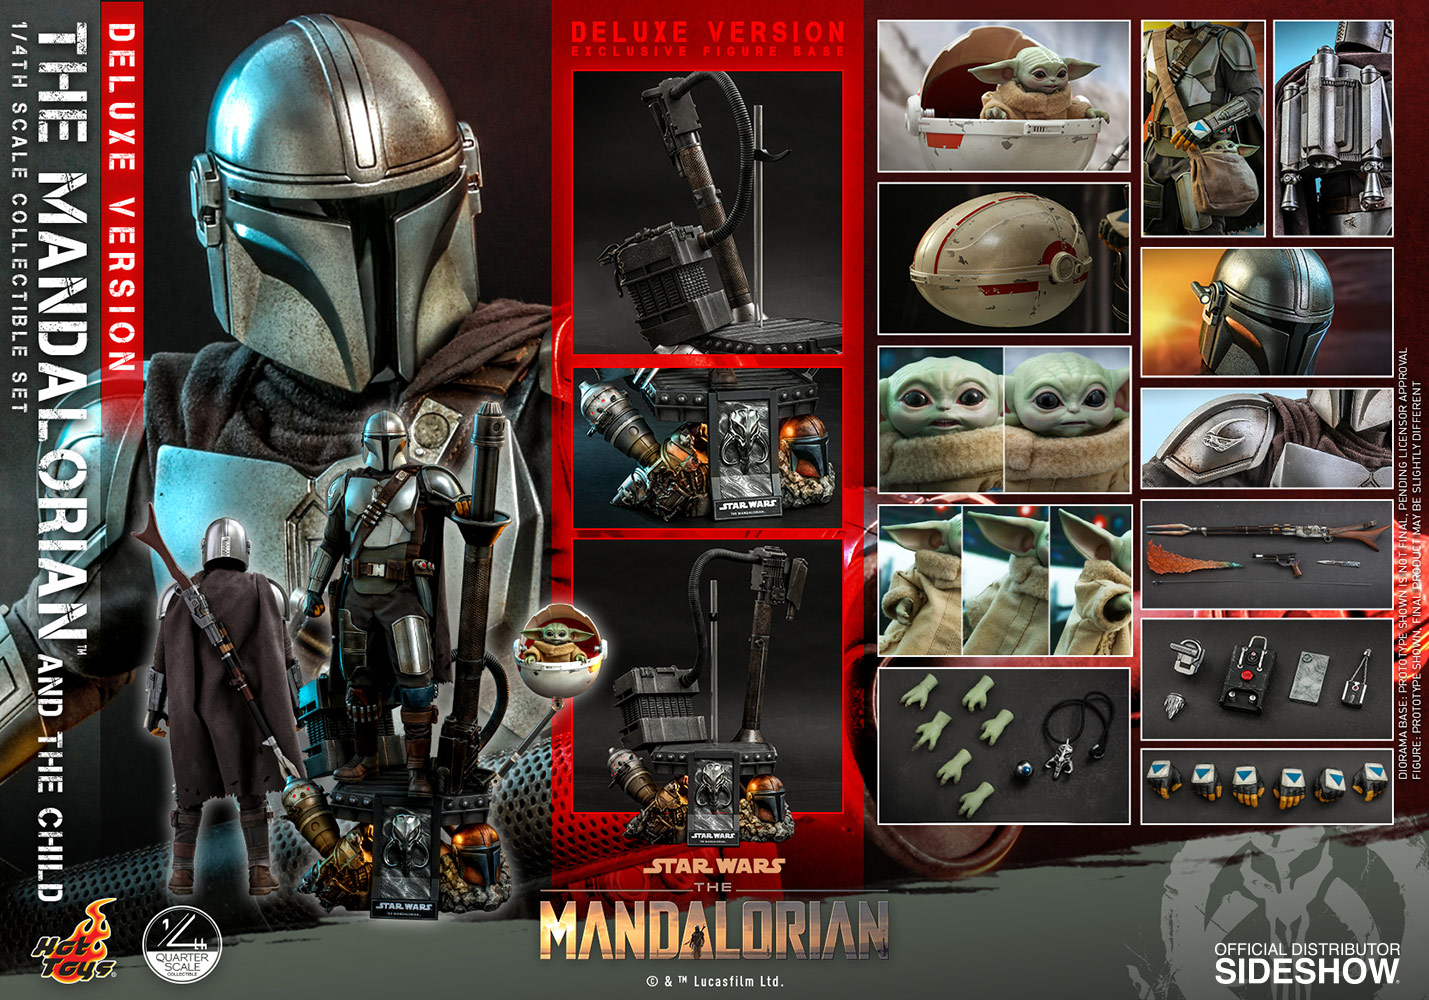 The Mandalorian™ and Grogu™ (Deluxe Version) by Hot Toys